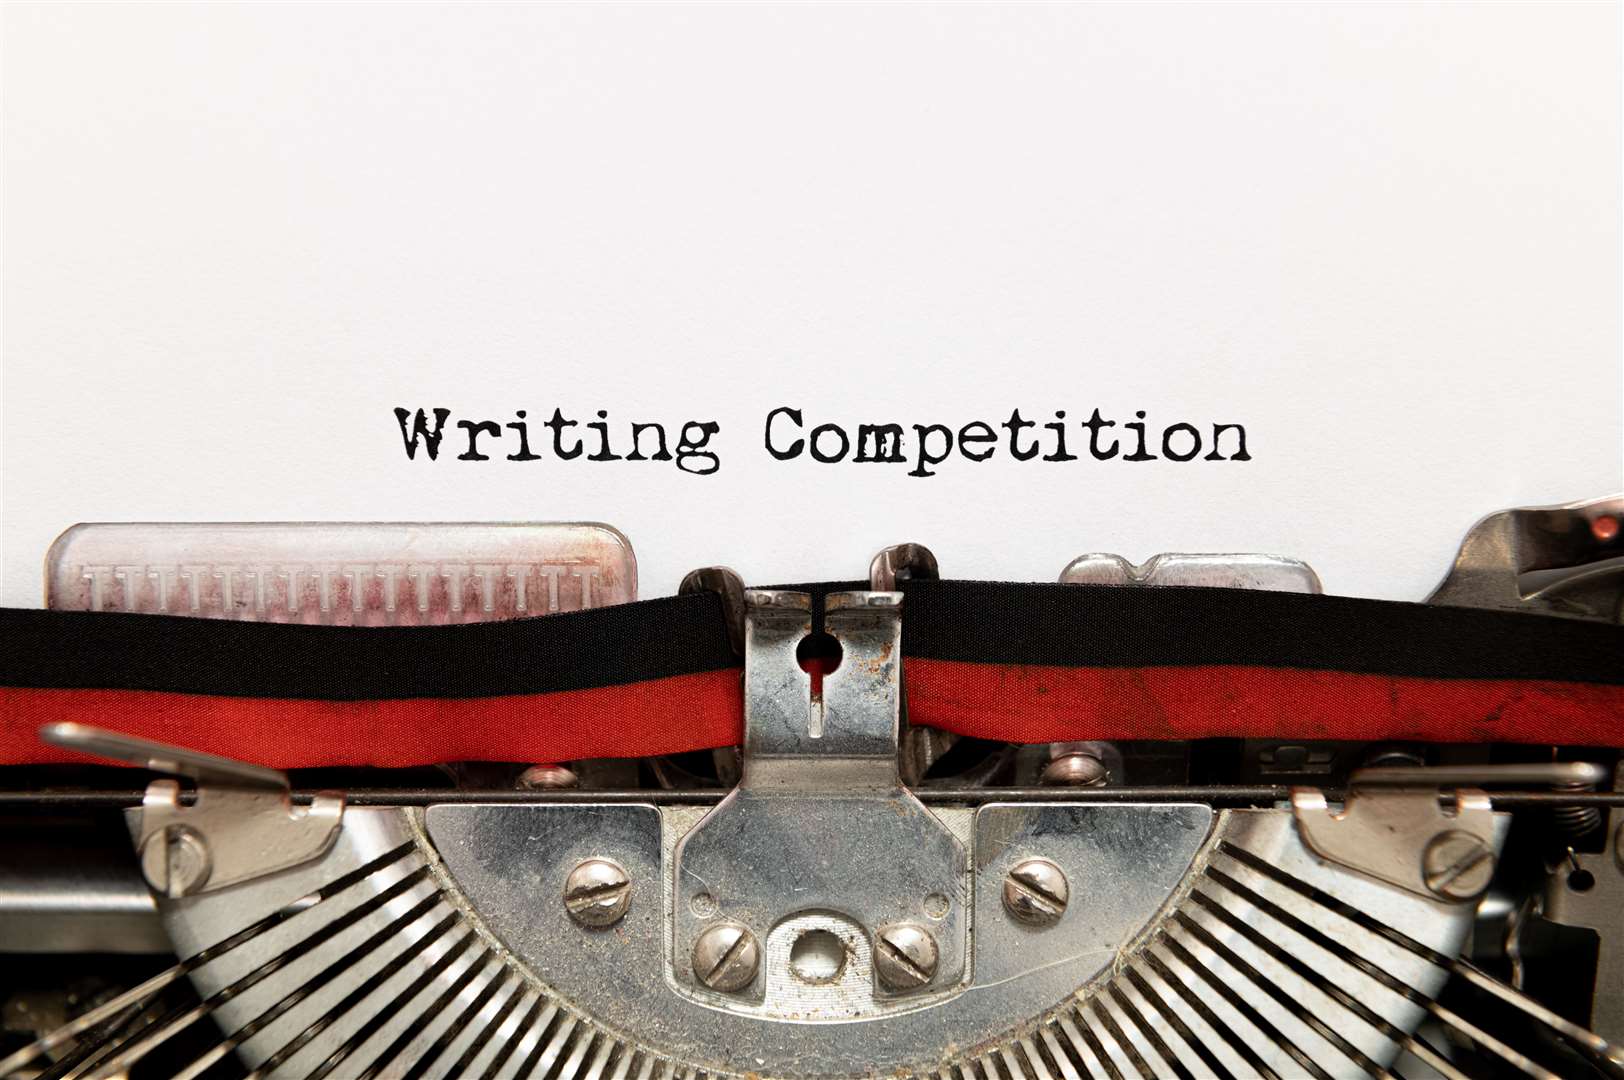 The deadline for entries to the Neil Gunn Writing Competition is Friday, March 4.